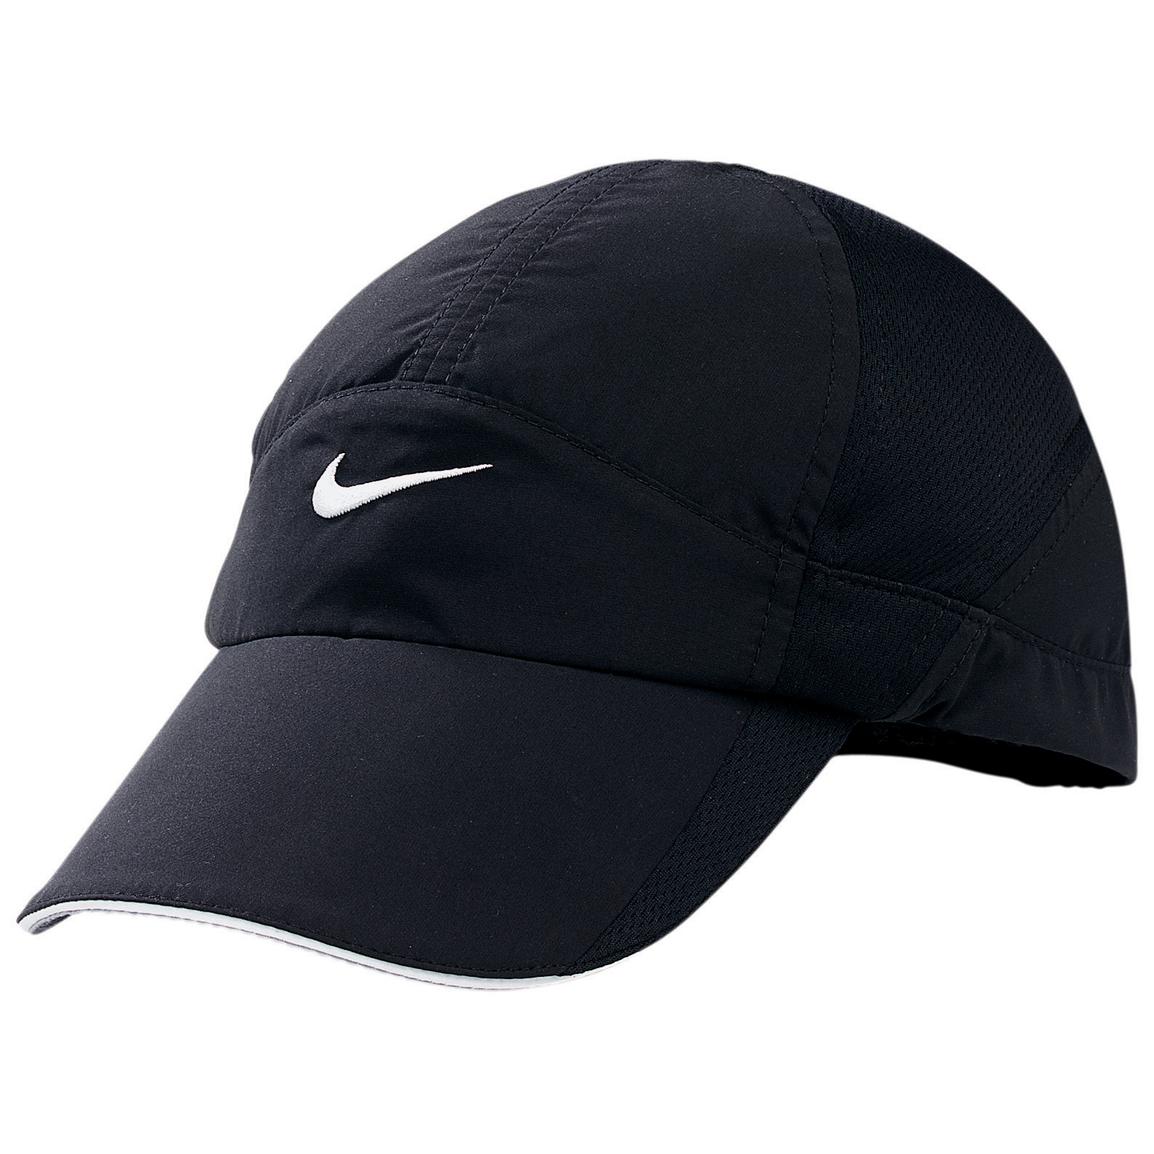 Women's Nike® Feather Light Cap - 143810, Hats & Caps at Sportsman's Guide